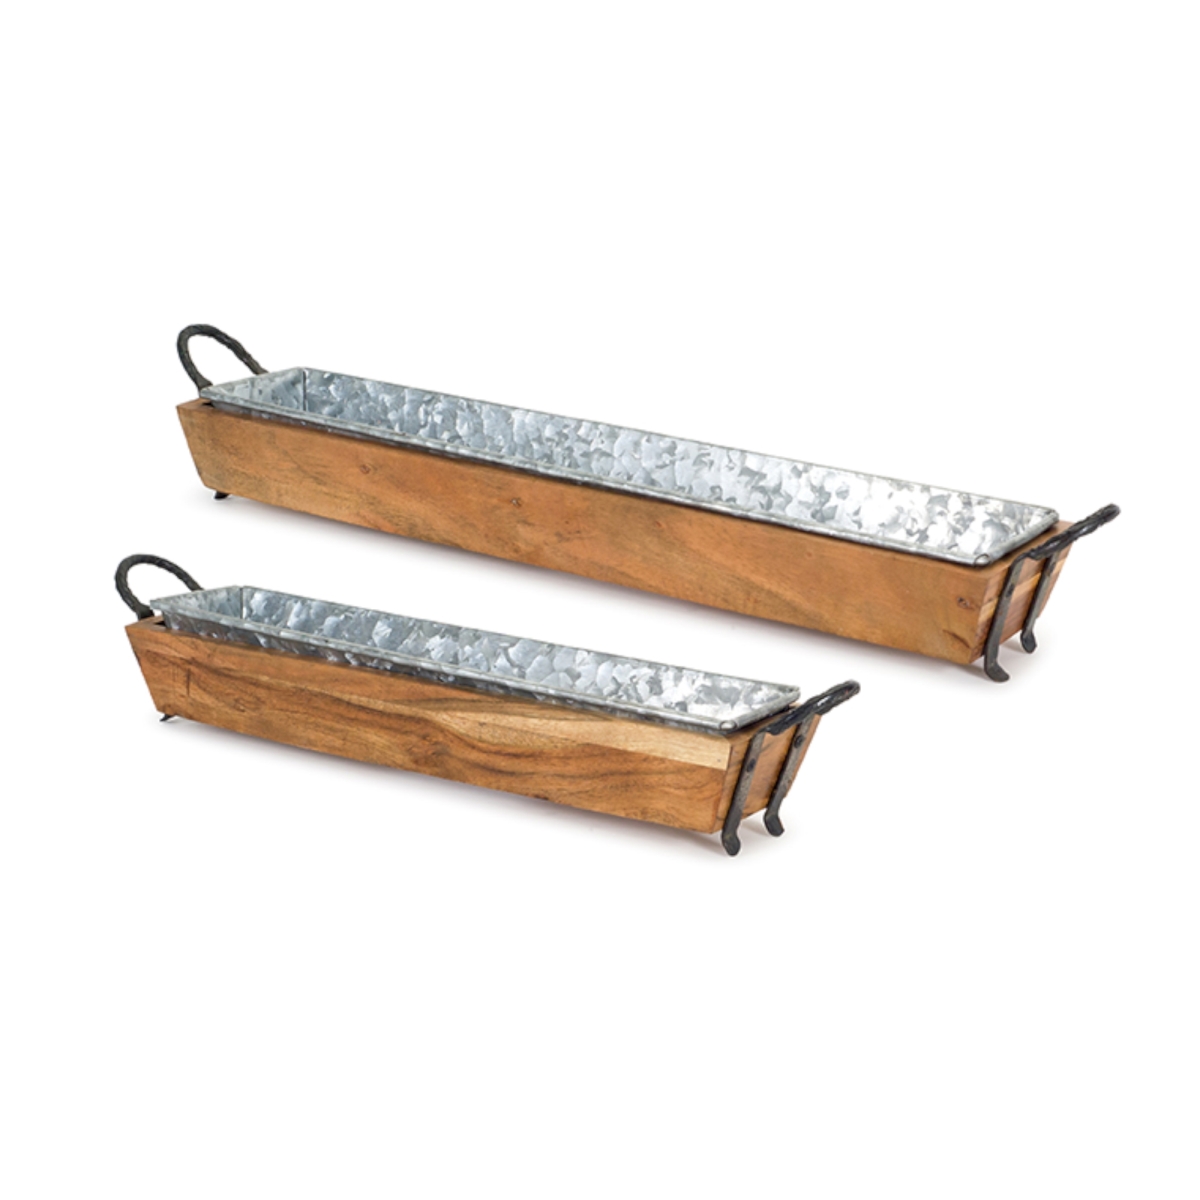 72102ds 21.5 X 4.5 In. Wood & Iron Tray, Brown & Tin - Set Of 2